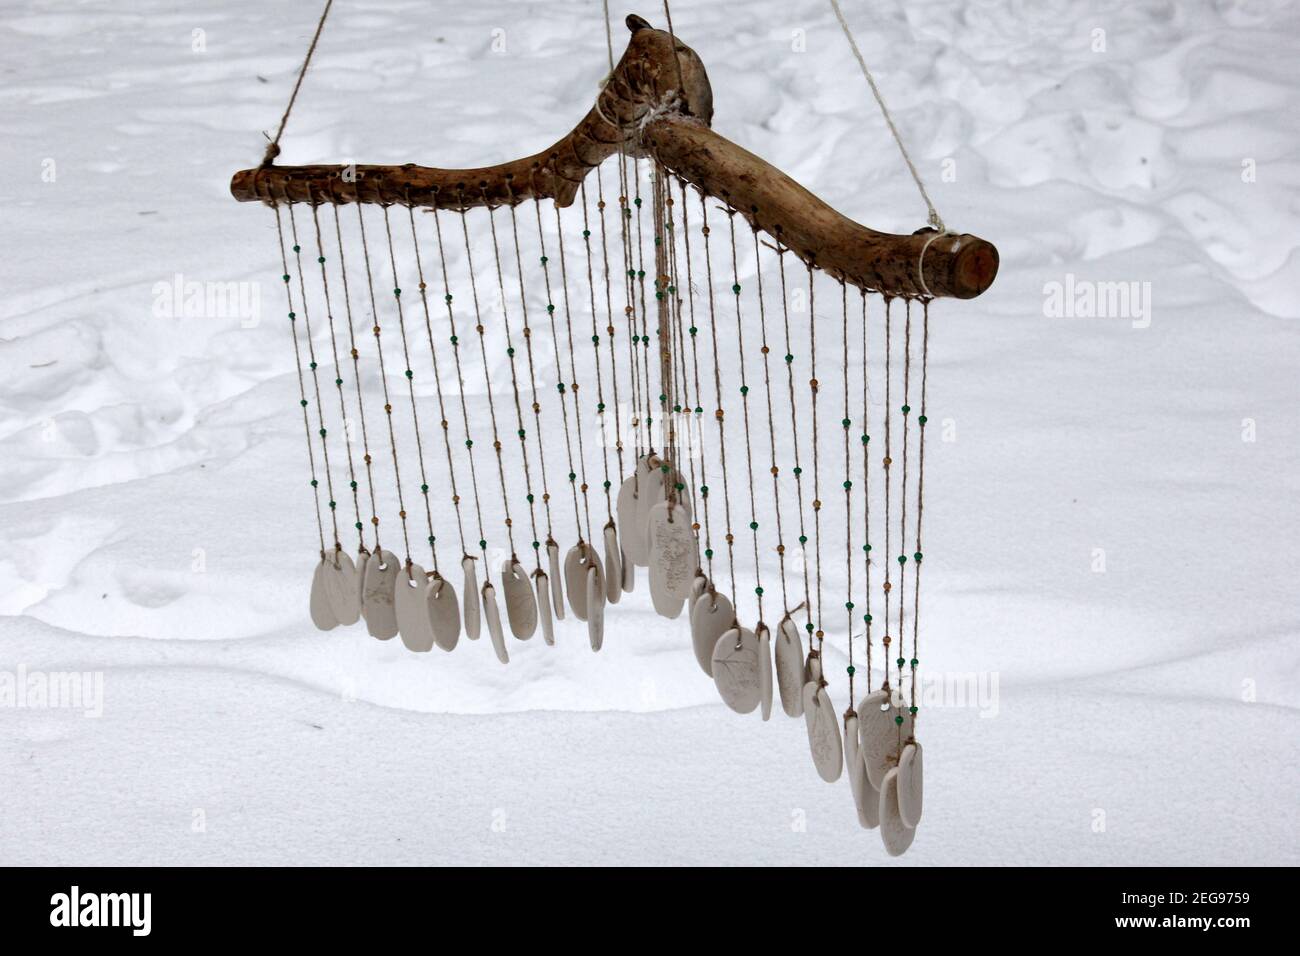 https://c8.alamy.com/comp/2EG9759/hand-made-wind-chimes-hanging-on-a-string-with-depth-of-field-effect-ceramic-wind-chime-hanging-outside-selective-focus-wind-bells-from-clay-2EG9759.jpg